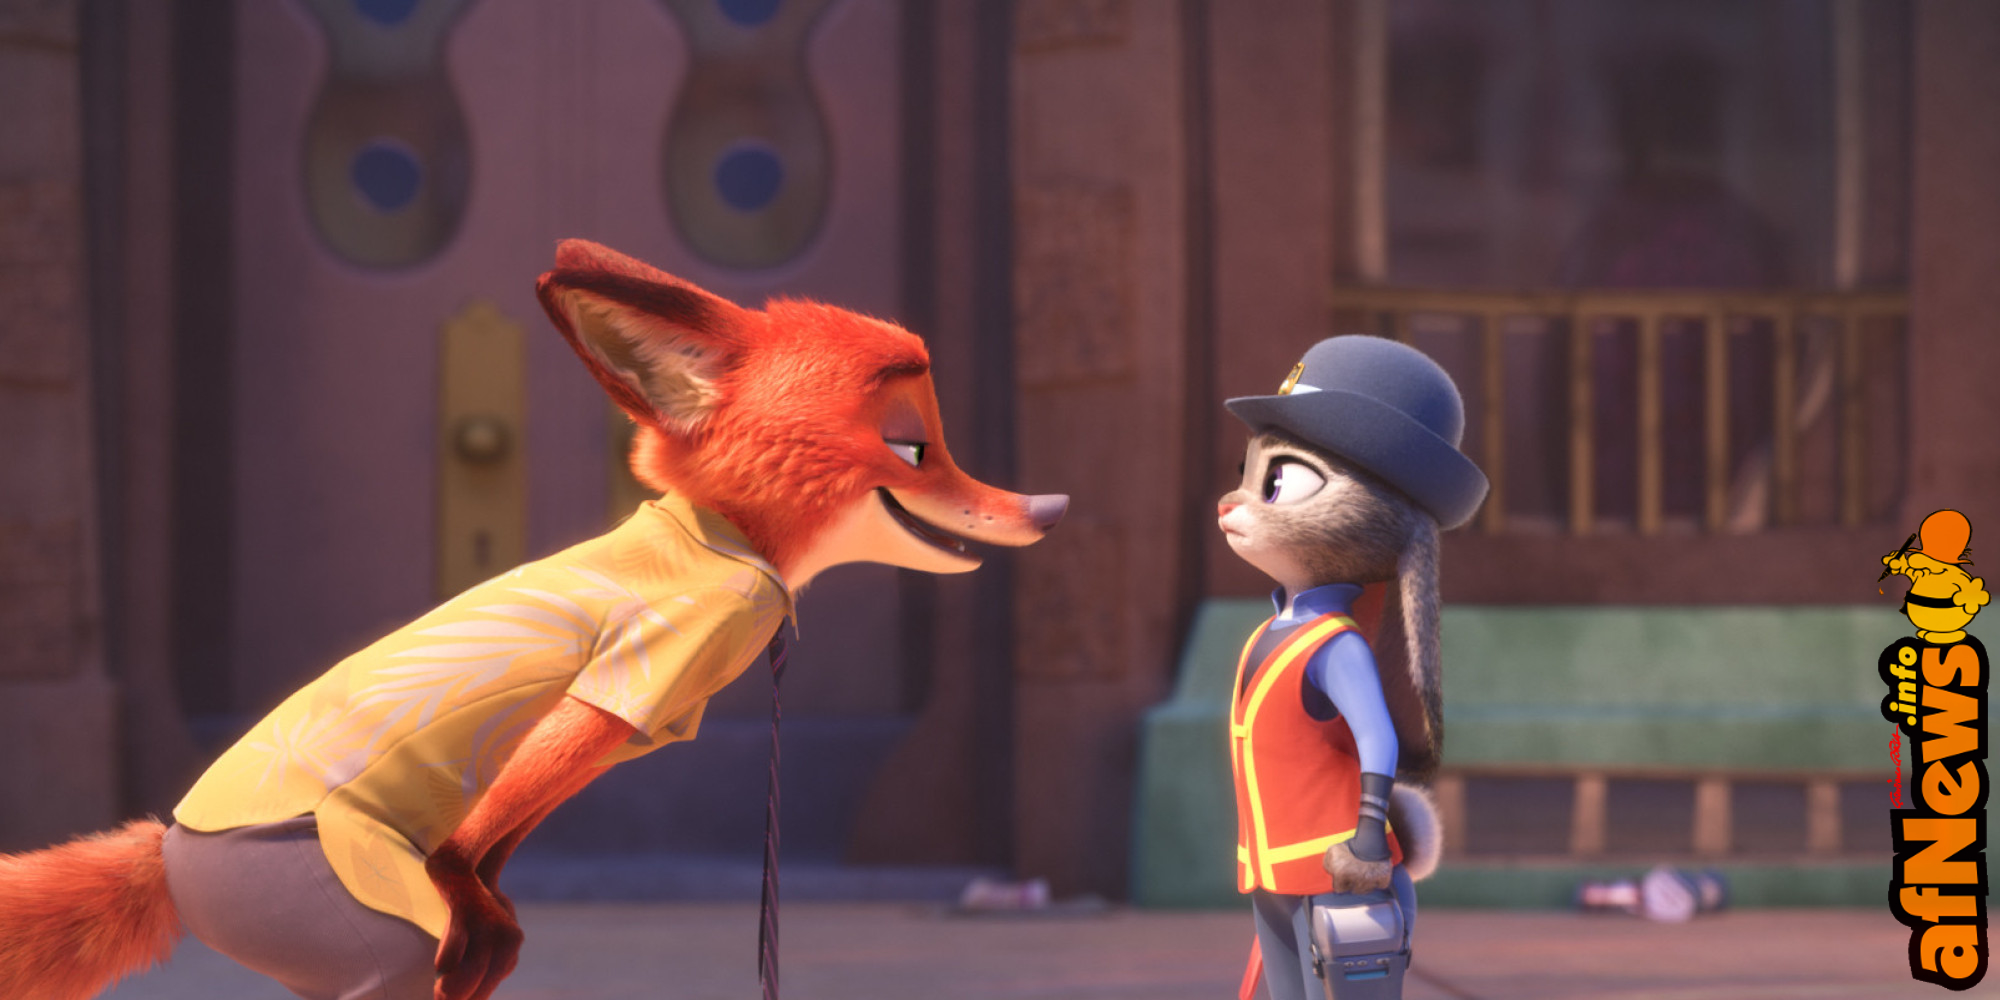 NATURAL ENEMIES ? Zootopia's first bunny officer Judy Hopps finds herself face to face with a fast-talking, scam-artist fox in Walt Disney Animation Studios' "Zootopia." Featuring the voices of Ginnifer Goodwin as Judy and Jason Bateman as Nick, "Zootopia" opens in theaters on March 4, 2016. ?2016 Disney. All Rights Reserved.